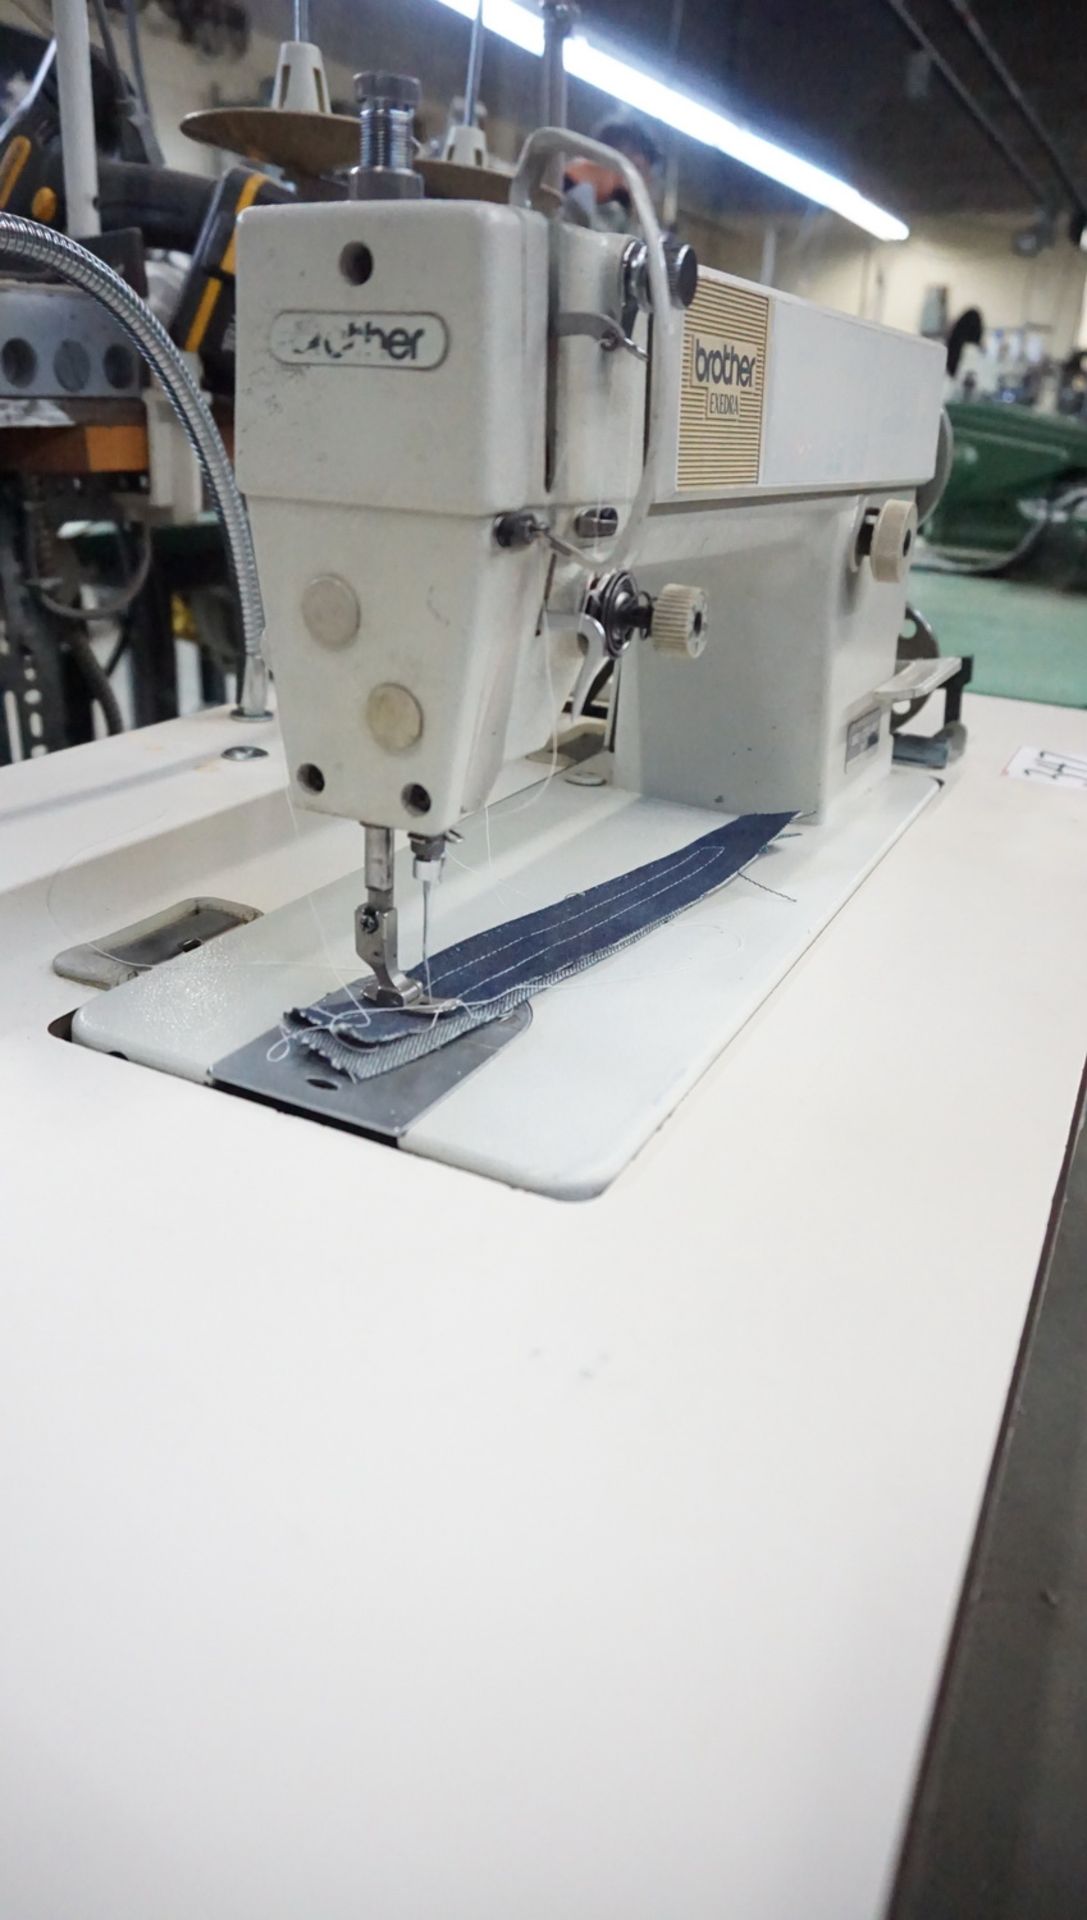 BROTHER DB2-B737-413 SINGLE THREAD SEWING MACHINE - Image 4 of 4